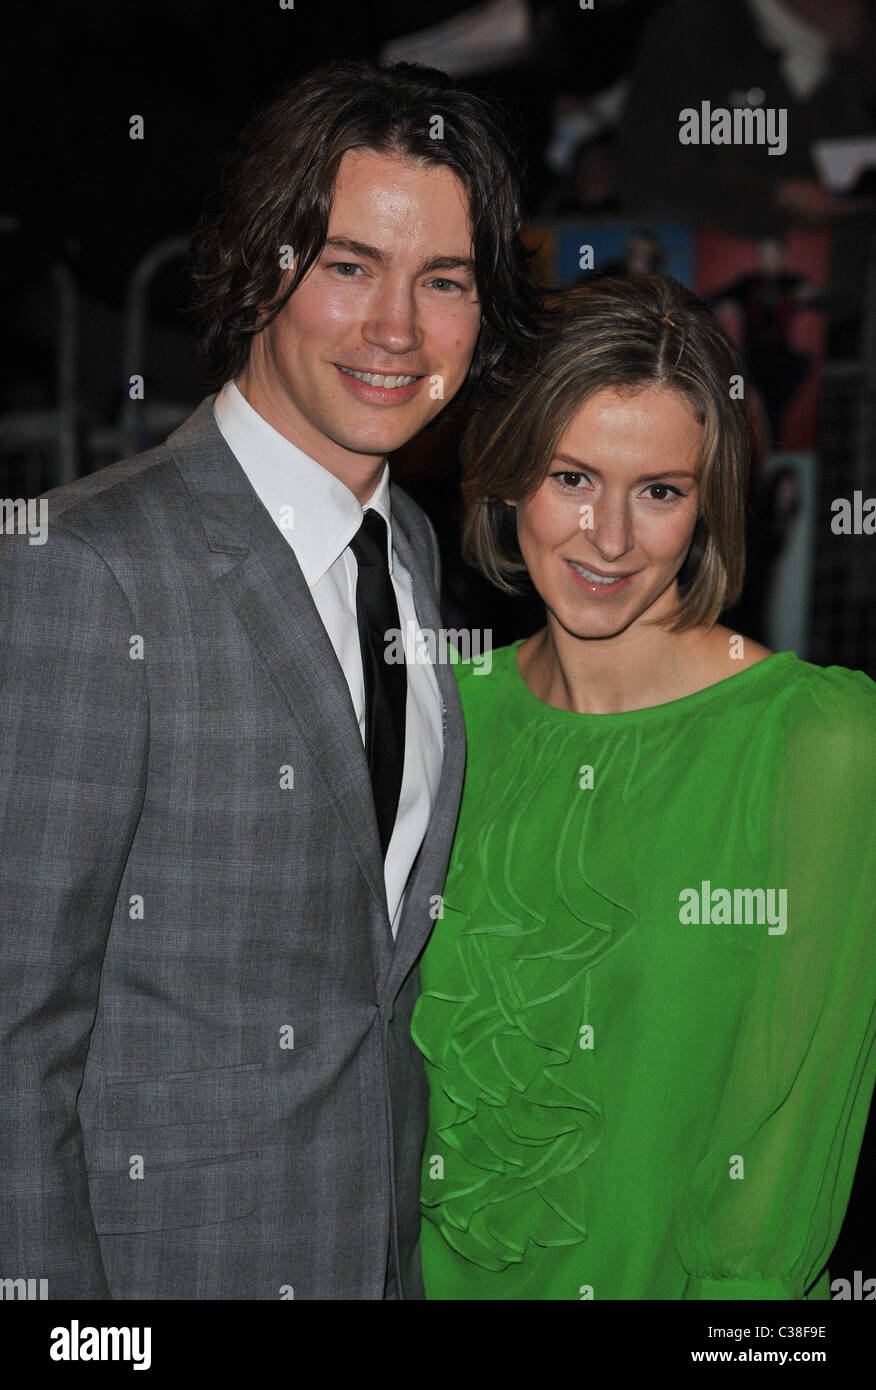 Tom Wisdom World Premiere of 'The Boat That Rocked' held at The Odeon,  Leicester Square - arrivals London, England - 23.03.09 Stock Photo - Alamy